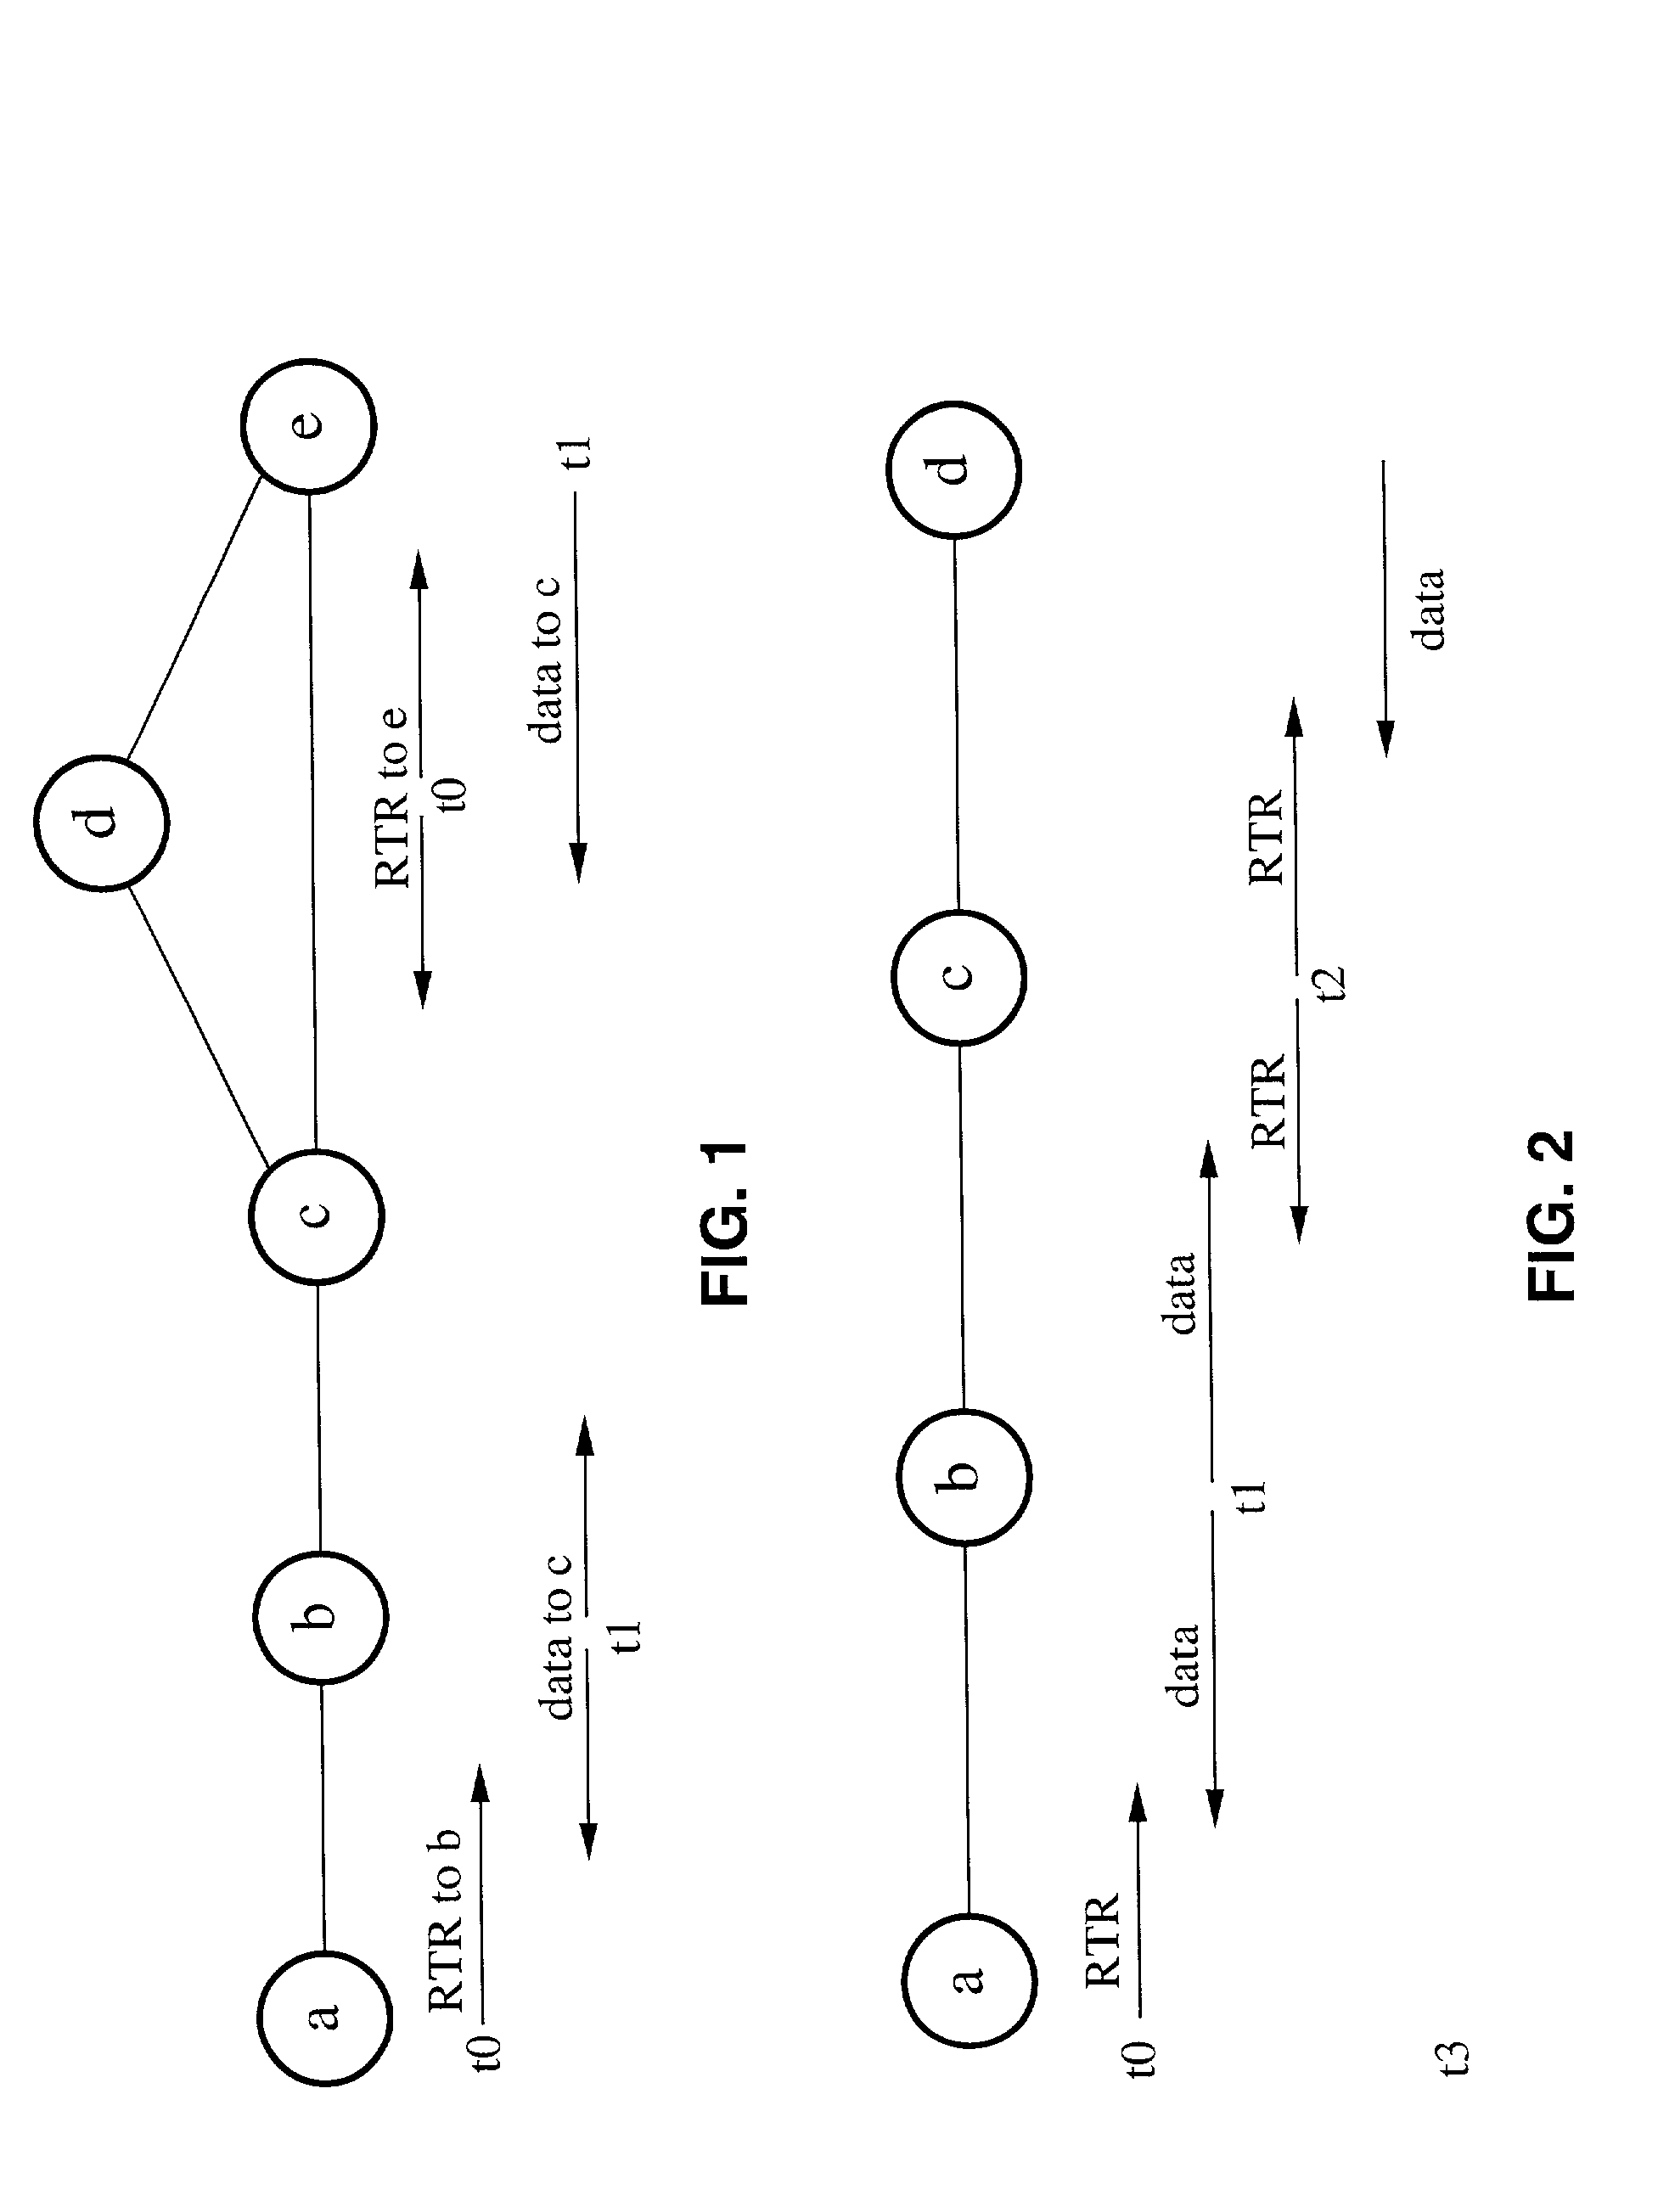 Receiver-initiated multiple access for AD-HOC networks (RIMA)